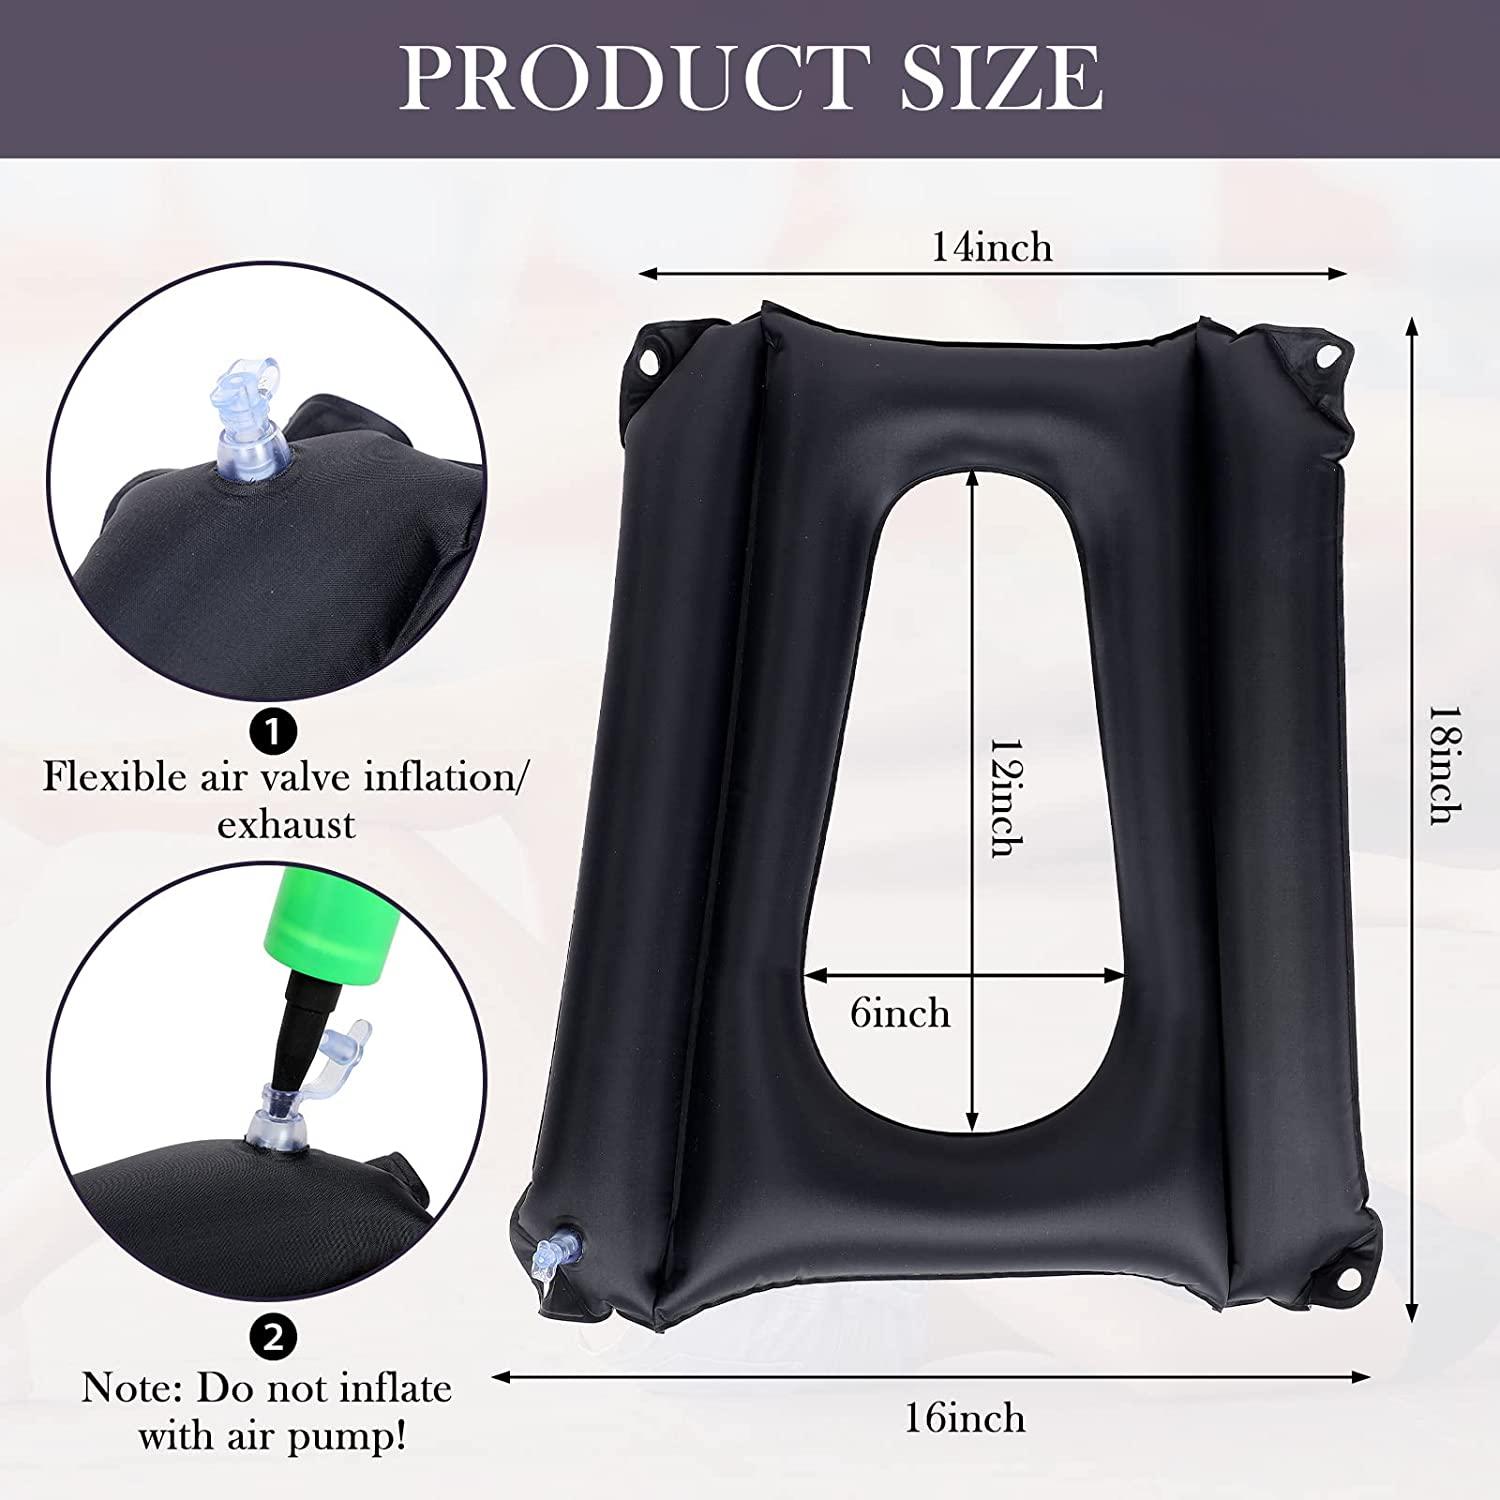 HAYU Inflatable Cushions Anti-Bedsore PVC, Pads Nursing Bed Pad to Prevent  Bed Sores for Elderly Bedridden Disabled,Relieve Pressure Wheelchair & Bed